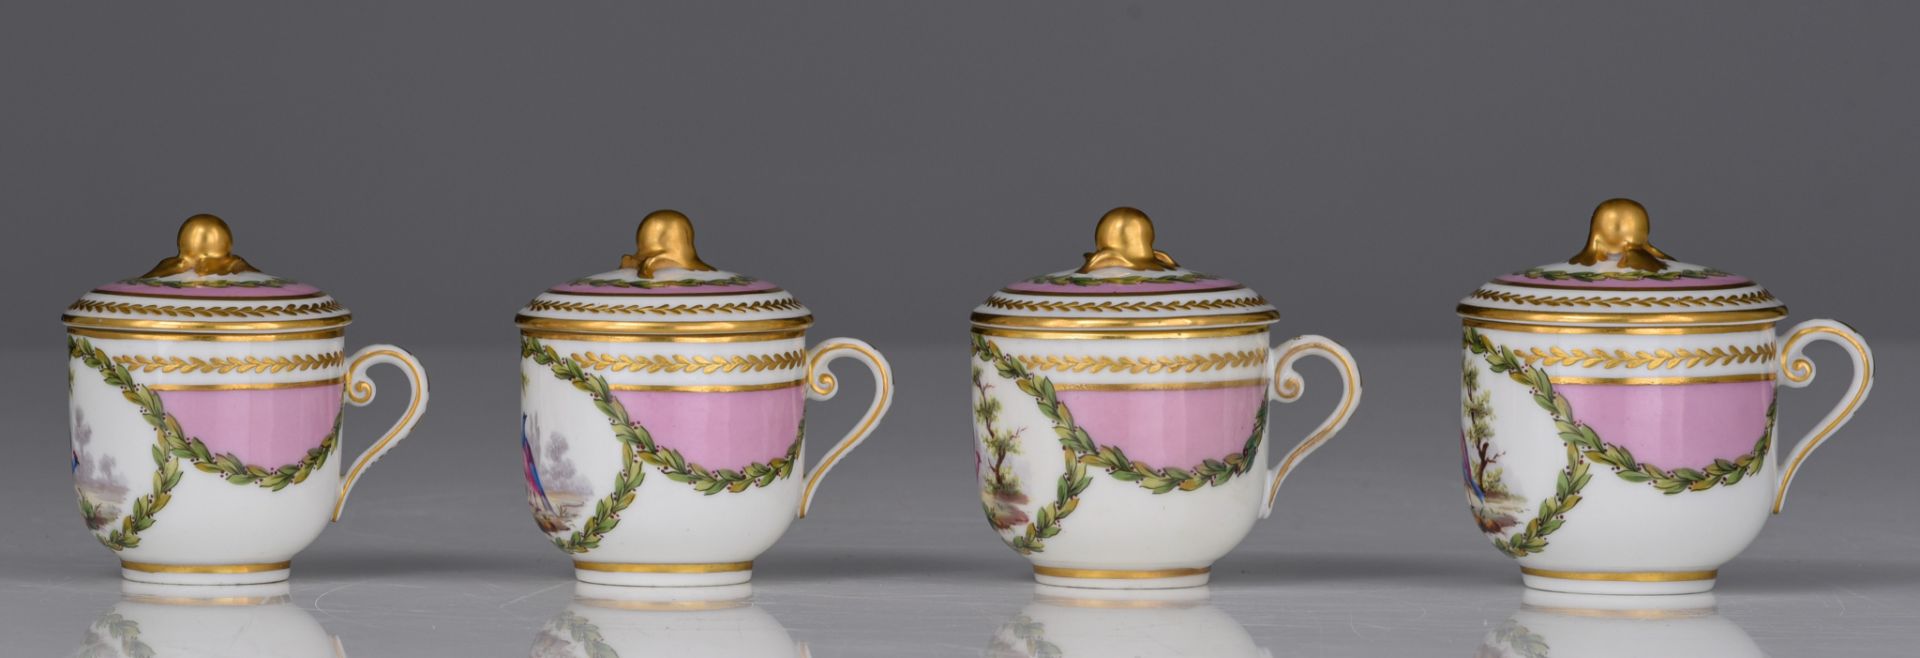 (BIDDING ONLY ON CARLOBONTE.BE) A 12 person Sevres porcelain set of dessert cups on a matching tray, - Image 6 of 18